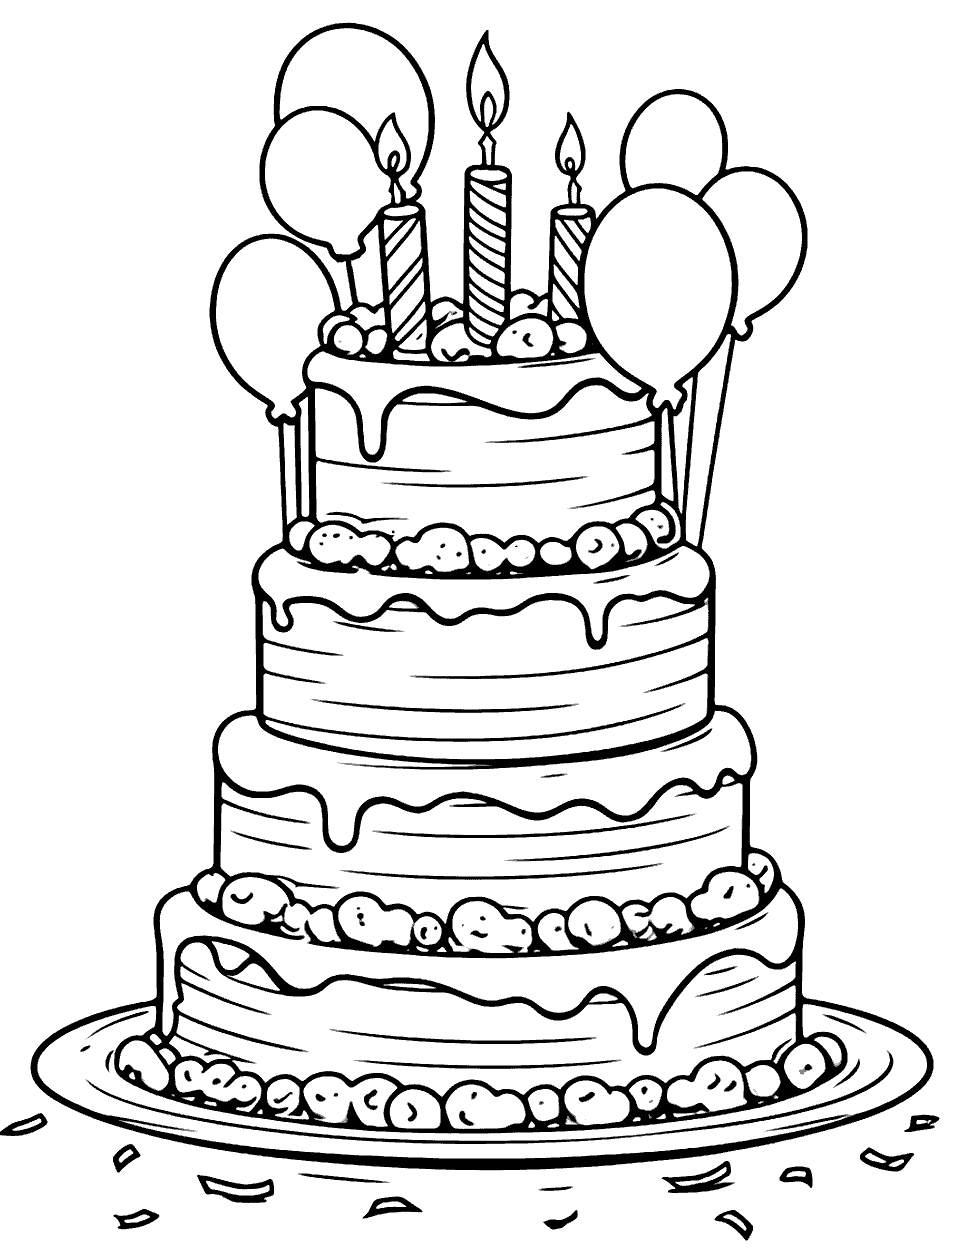 Birthday Celebration Cake Coloring Page - A large birthday celebration with a cake with candles and balloons around it.